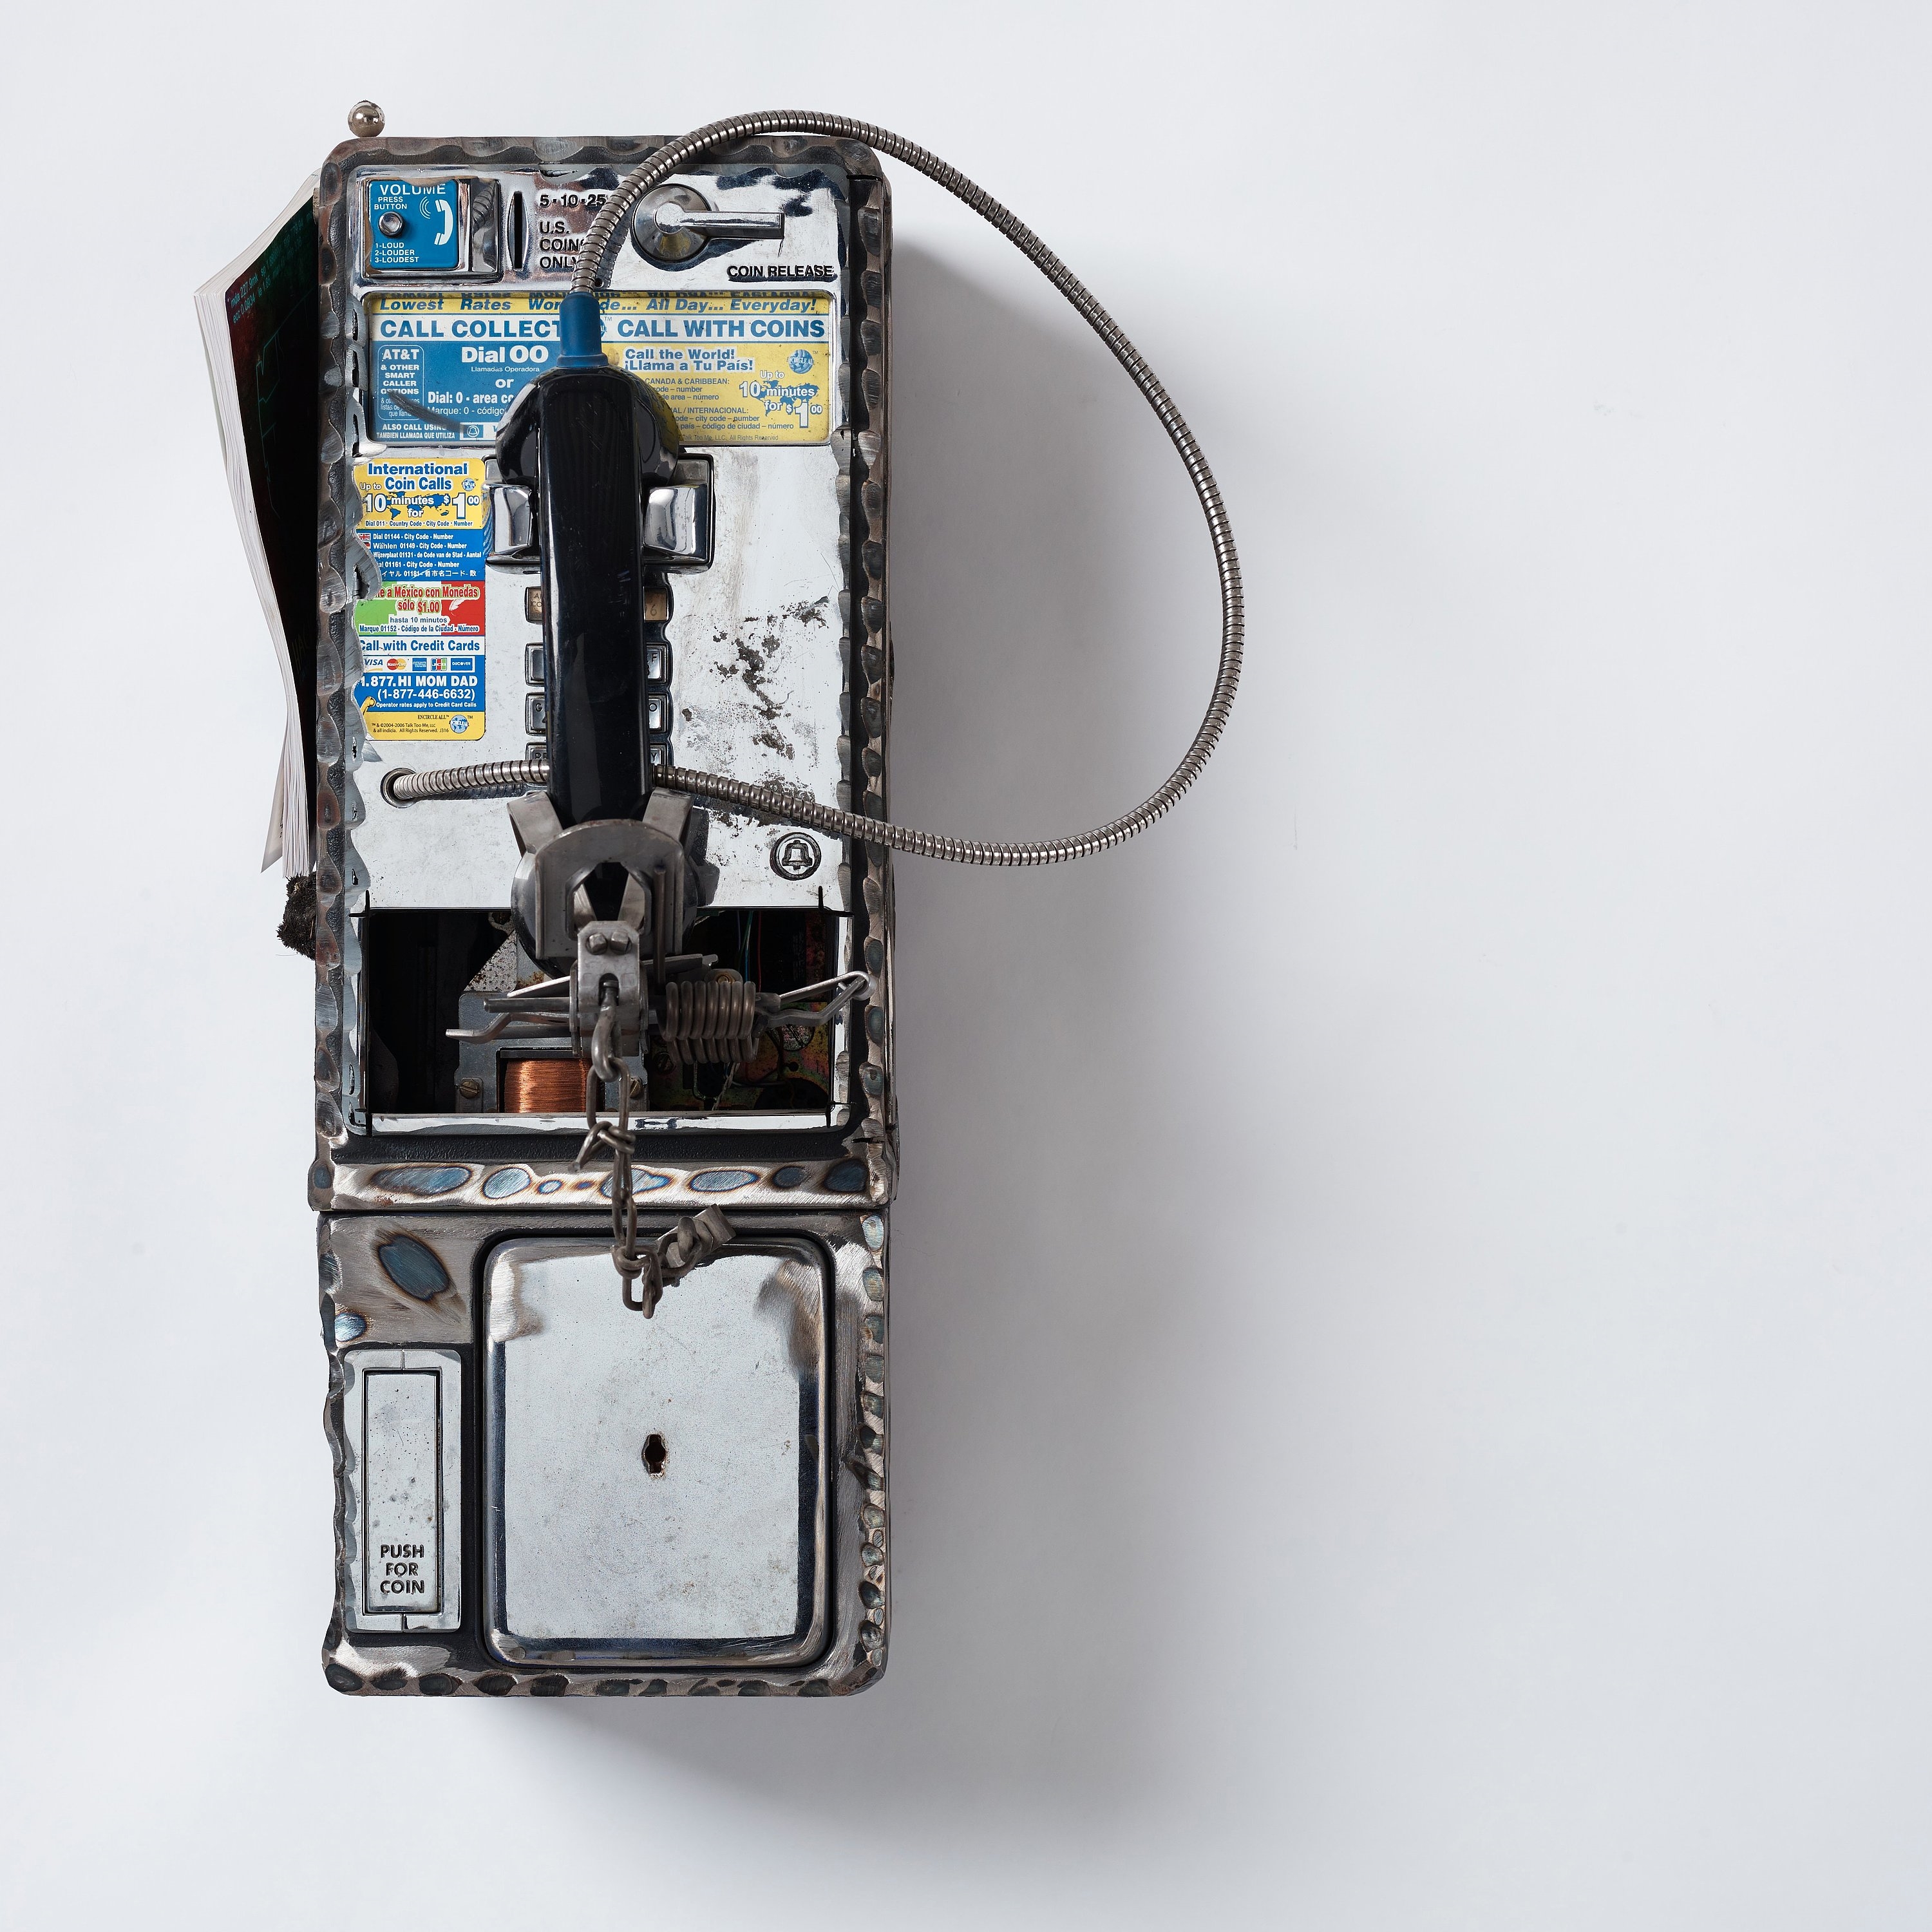 Artwork by Jason Matthew Lee, BRUTEFORCEPHREAK: thud, Made of Welded payphones, magnets, payphone dust, duct tape, small mammal trap, thud magazine